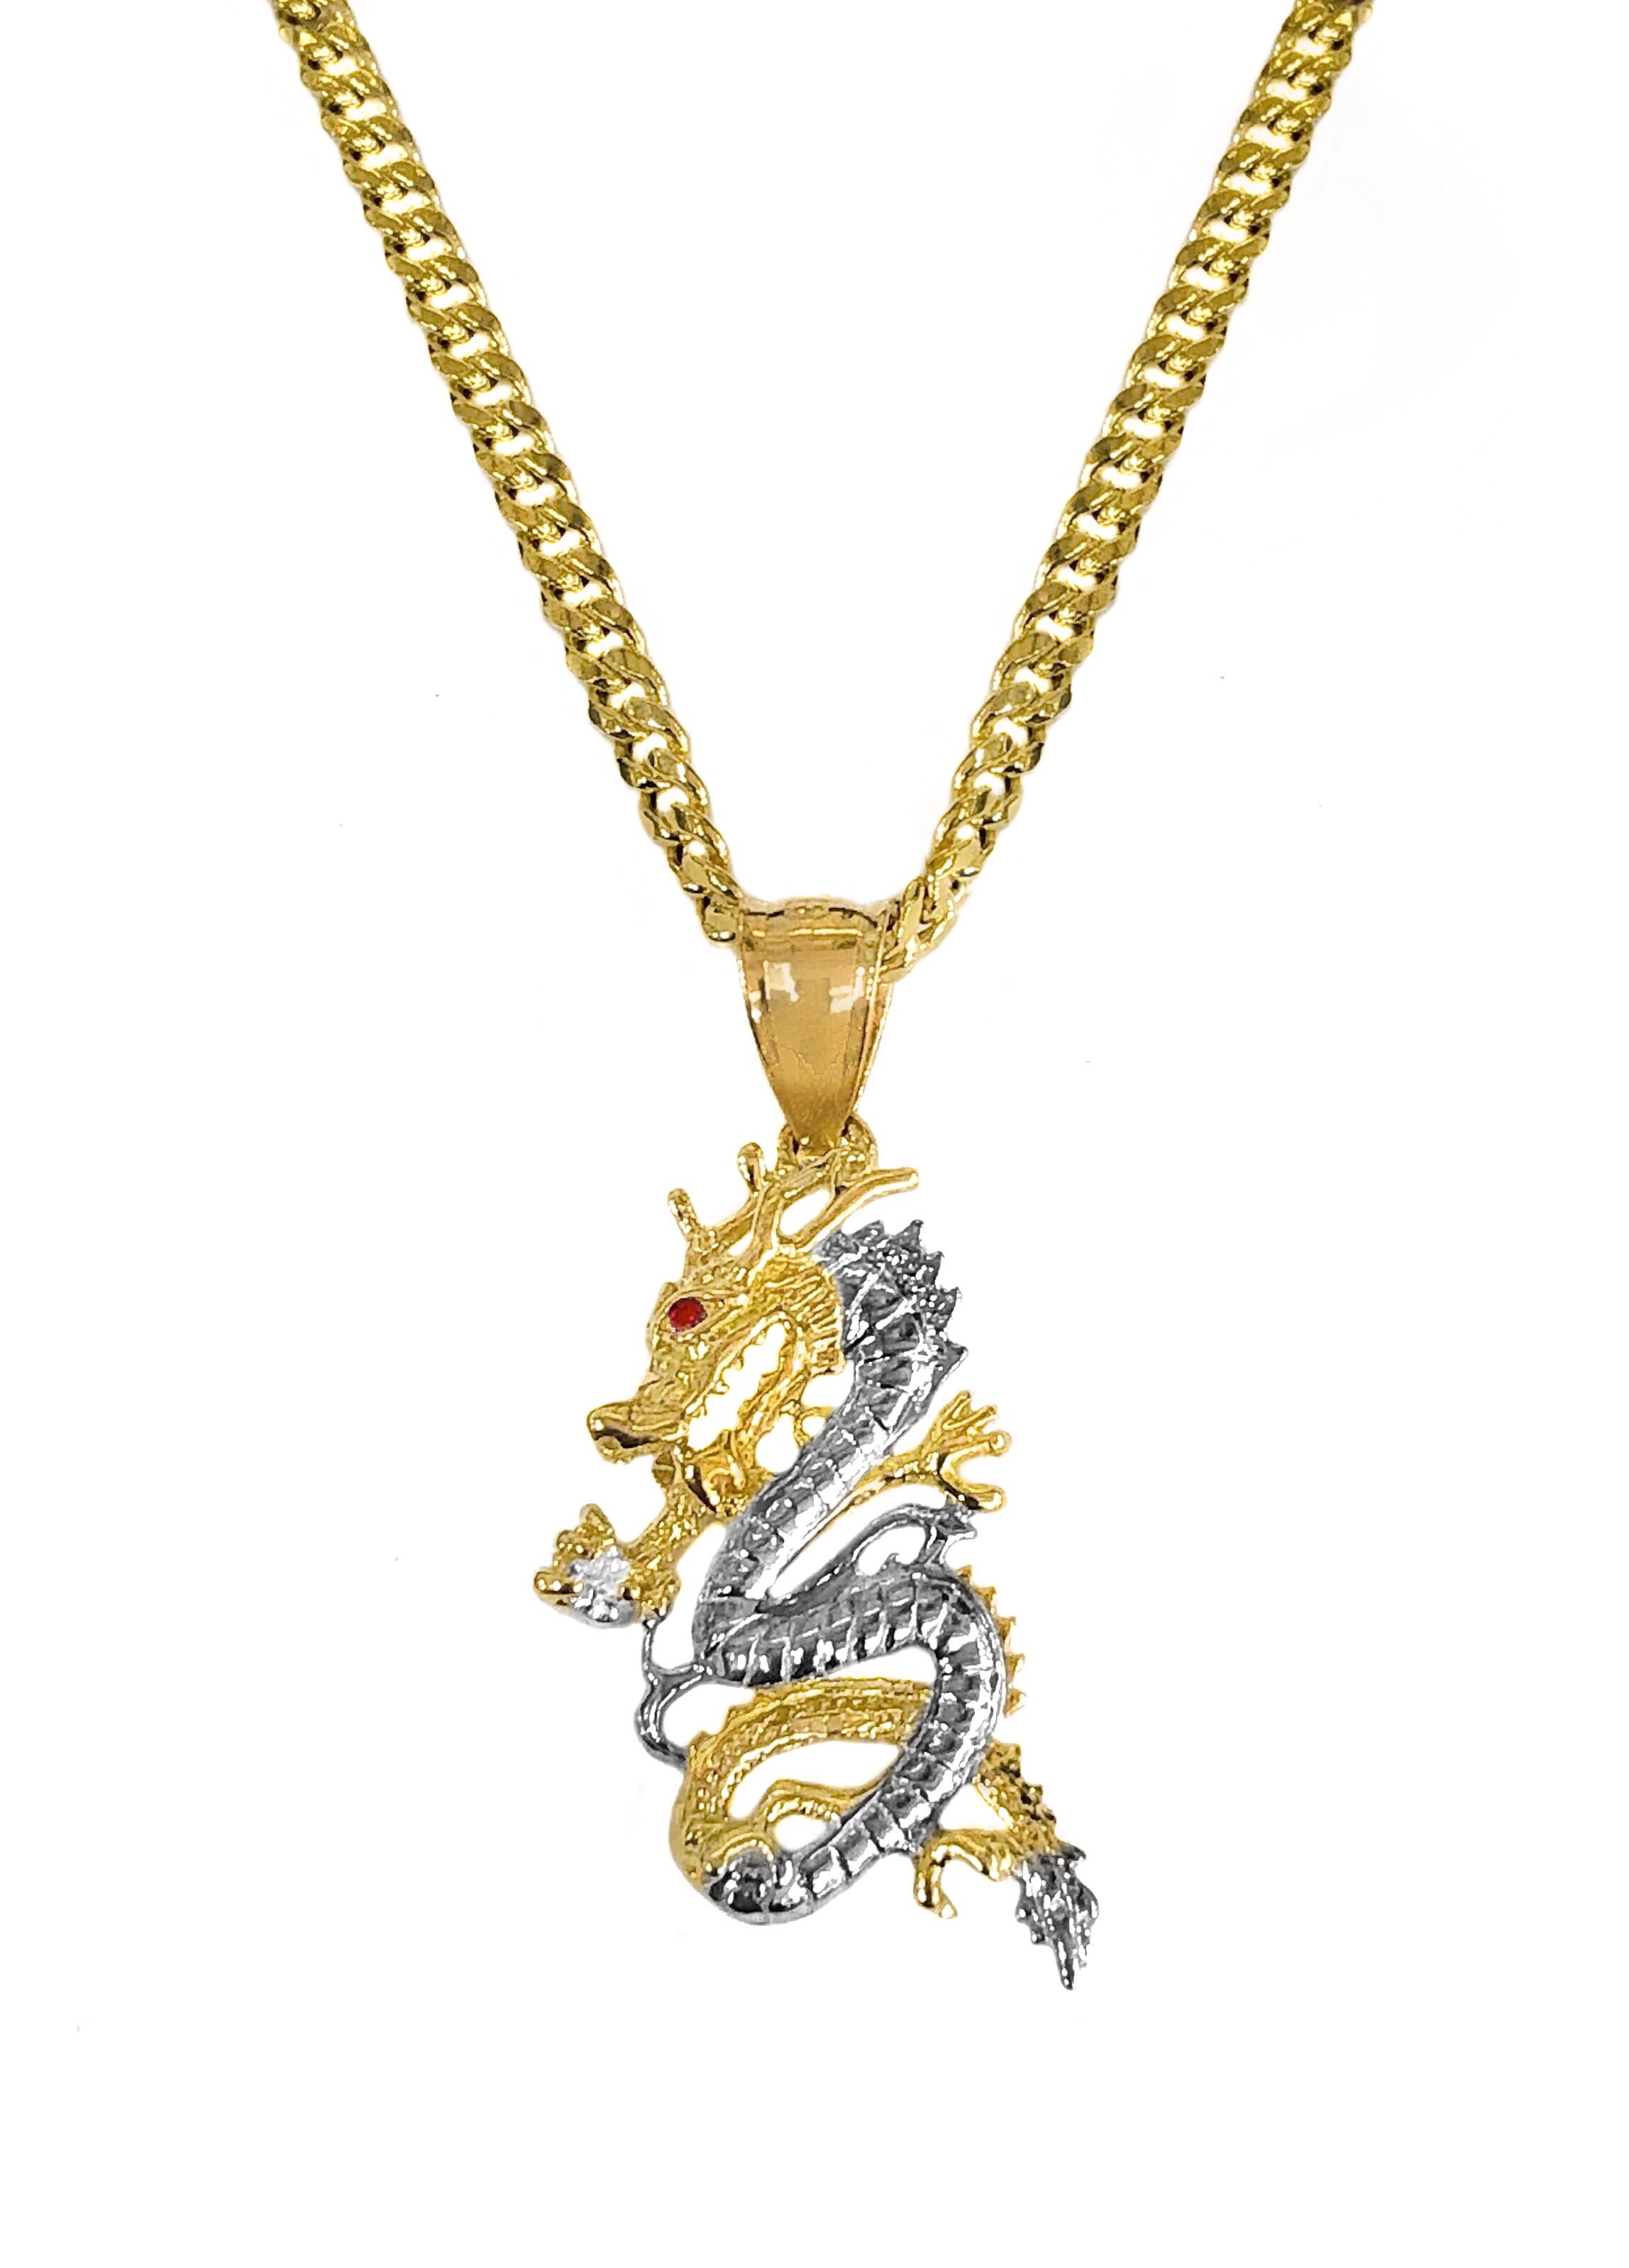 14K YELLOW GOLD DRAGON NECKLACE